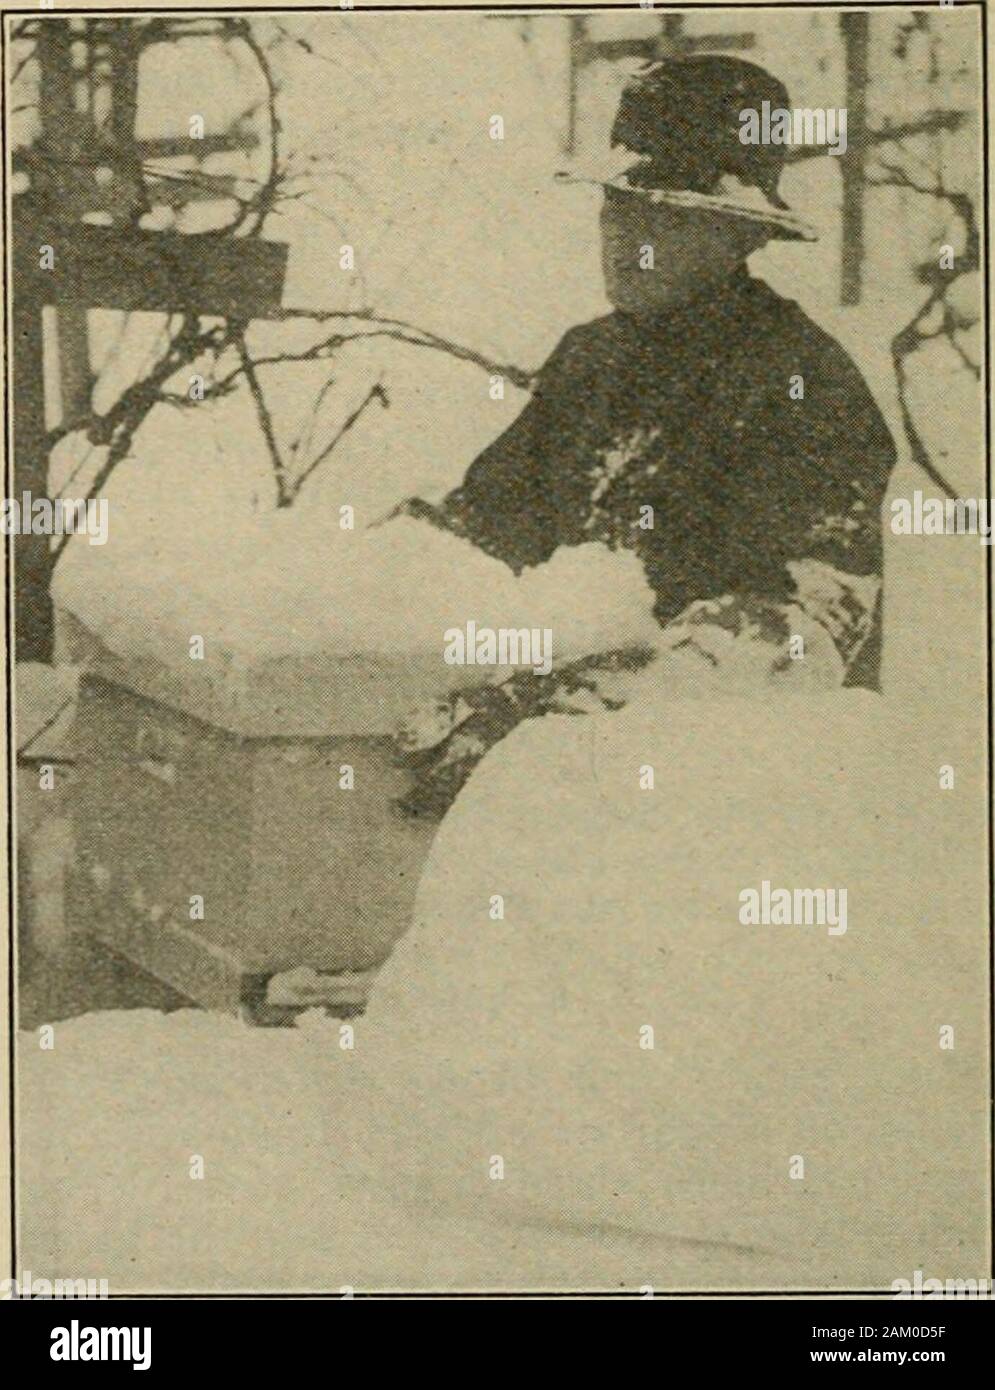 Gleanings in bee culture . P:g 1.—Hunting bees—not in the woods, but inthe snow. Standing waist deep, a big cake of snowwas tirst removed, exposing the top of the hive. completely enveloped the hives. In anotherview (Fig. 5) will be seen the men loadingthe hives on a low-wlieeled wagon with widetires. It was impossible to use any sled orbobs on account of the depth of snow, andfrom the further fact that the runners would. Pig. 2.—Lifting up the hive through three feet ofsnow. DECEMBER 15, 1913 889 Stock Photo